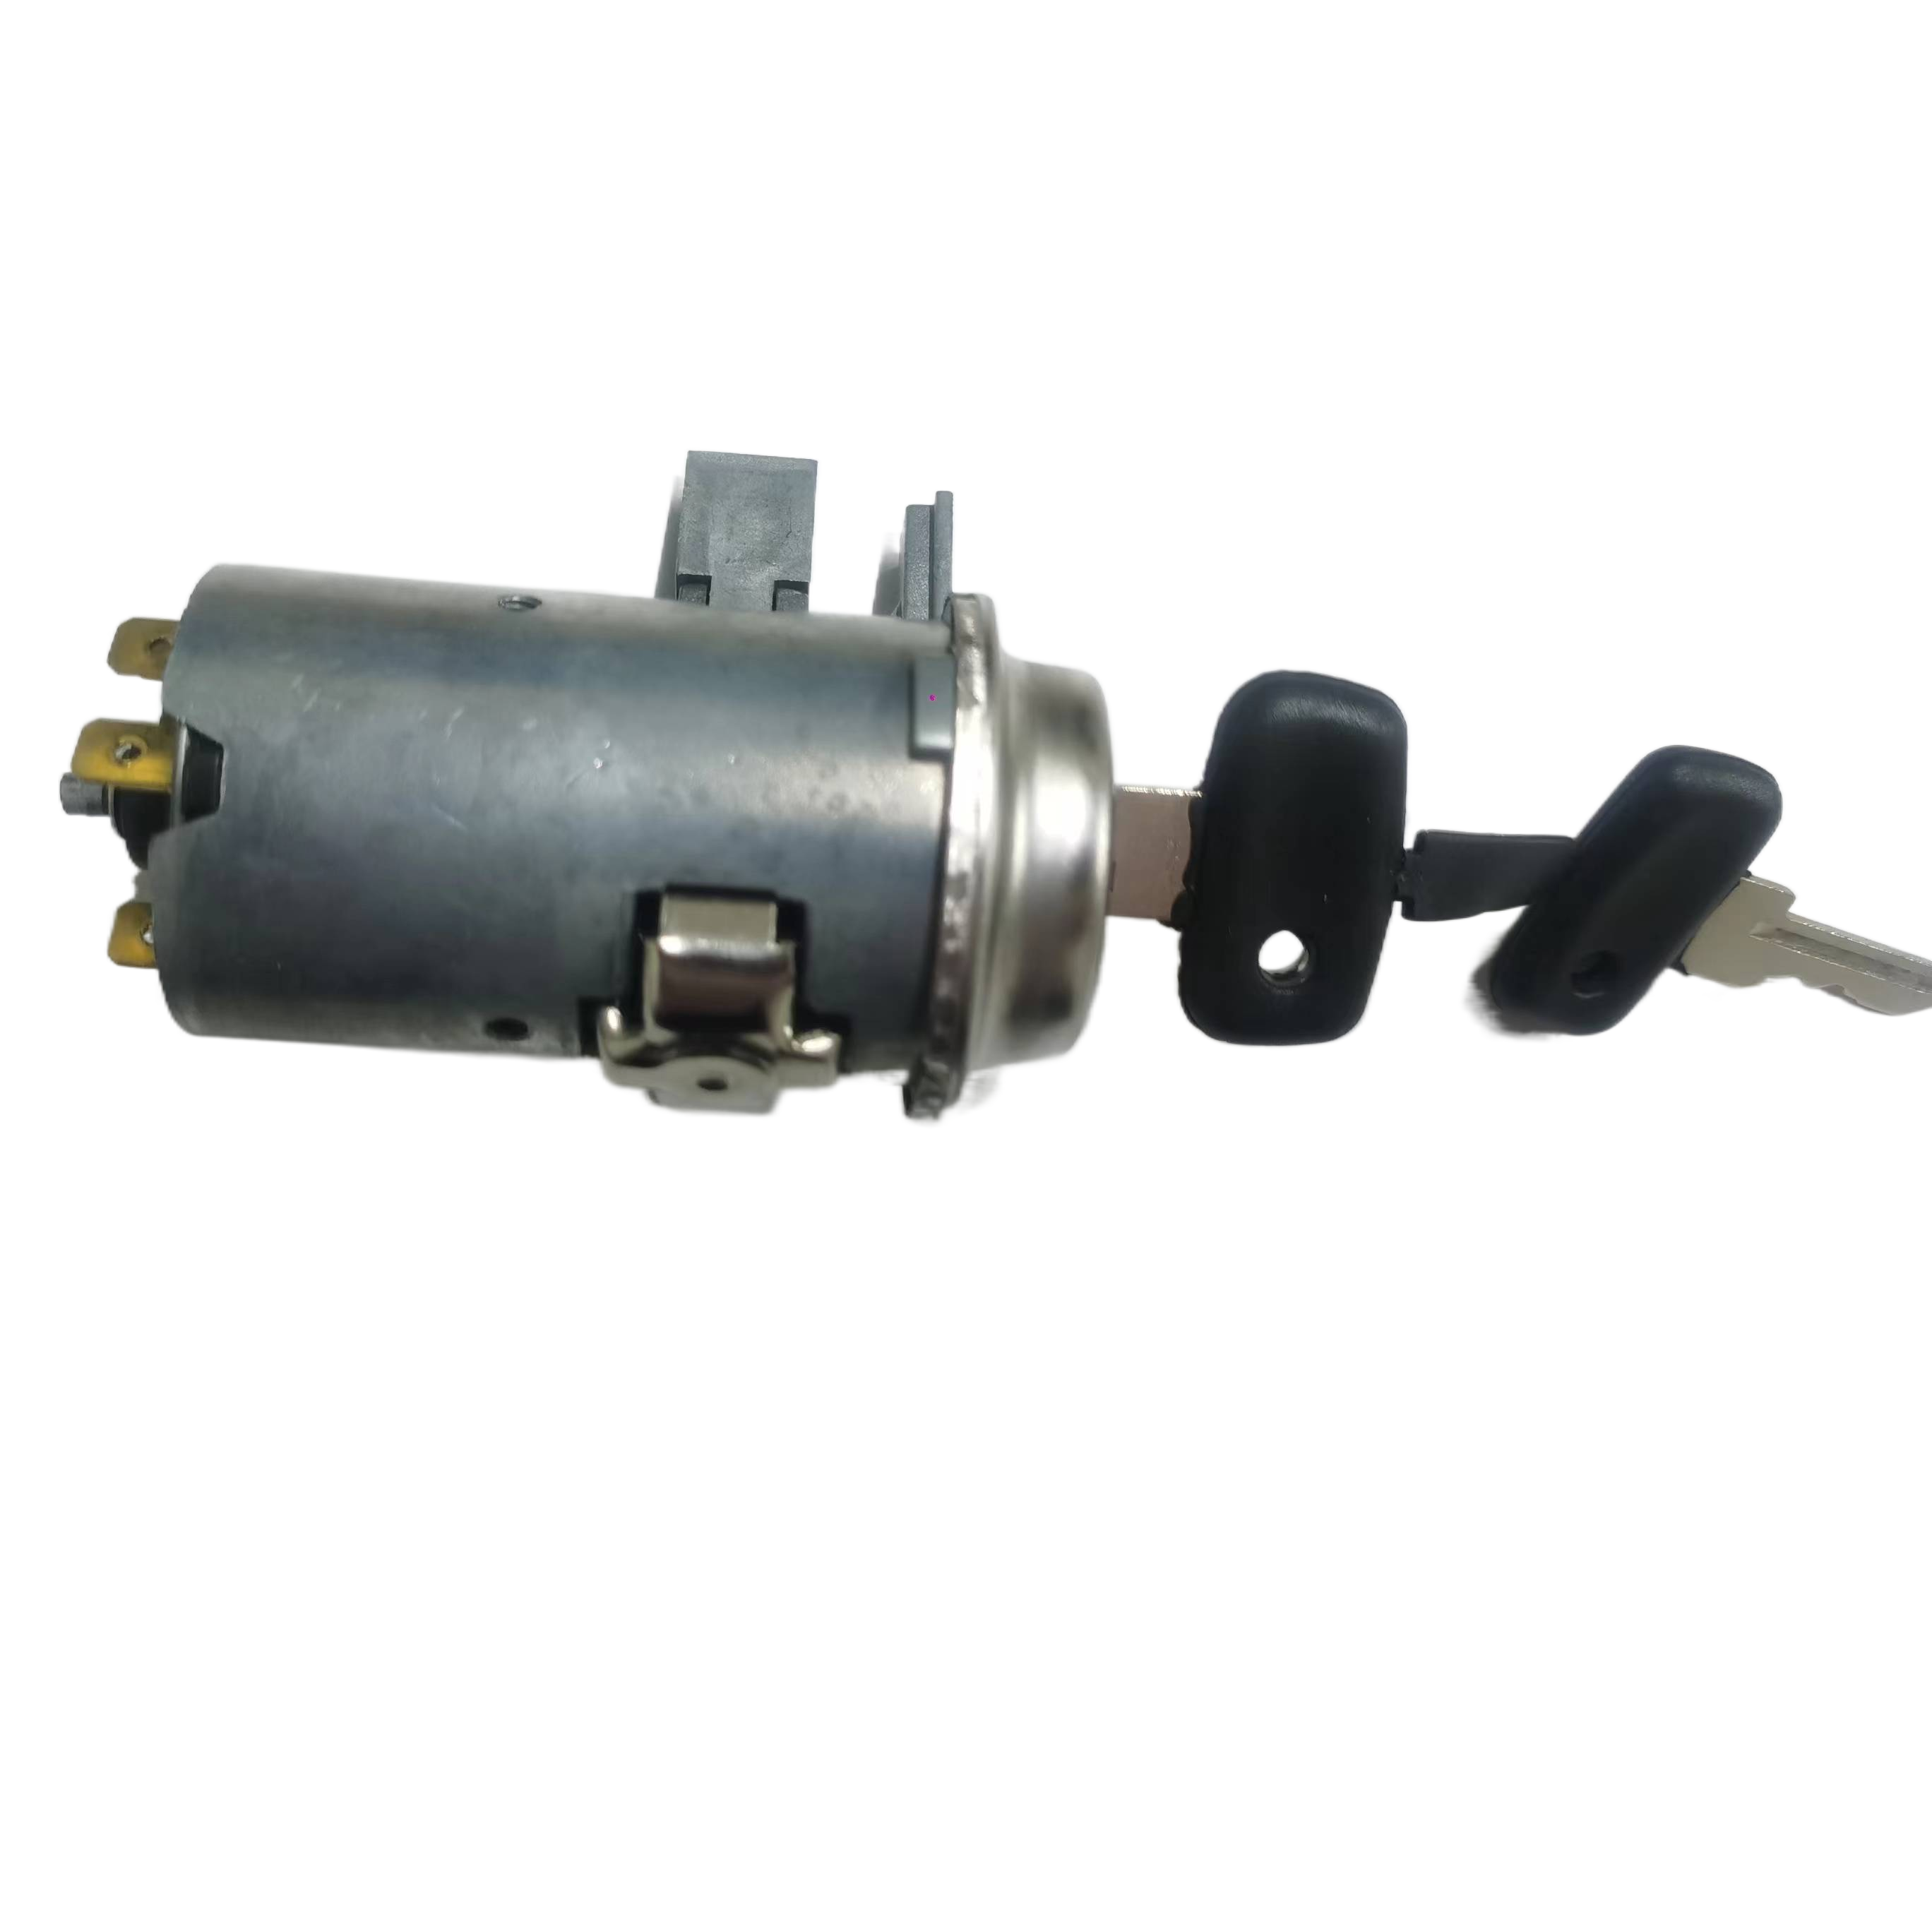 Manufacturer's direct sales of Lada Automobiles -6P ignition switch start switch OE: 2101-3704100